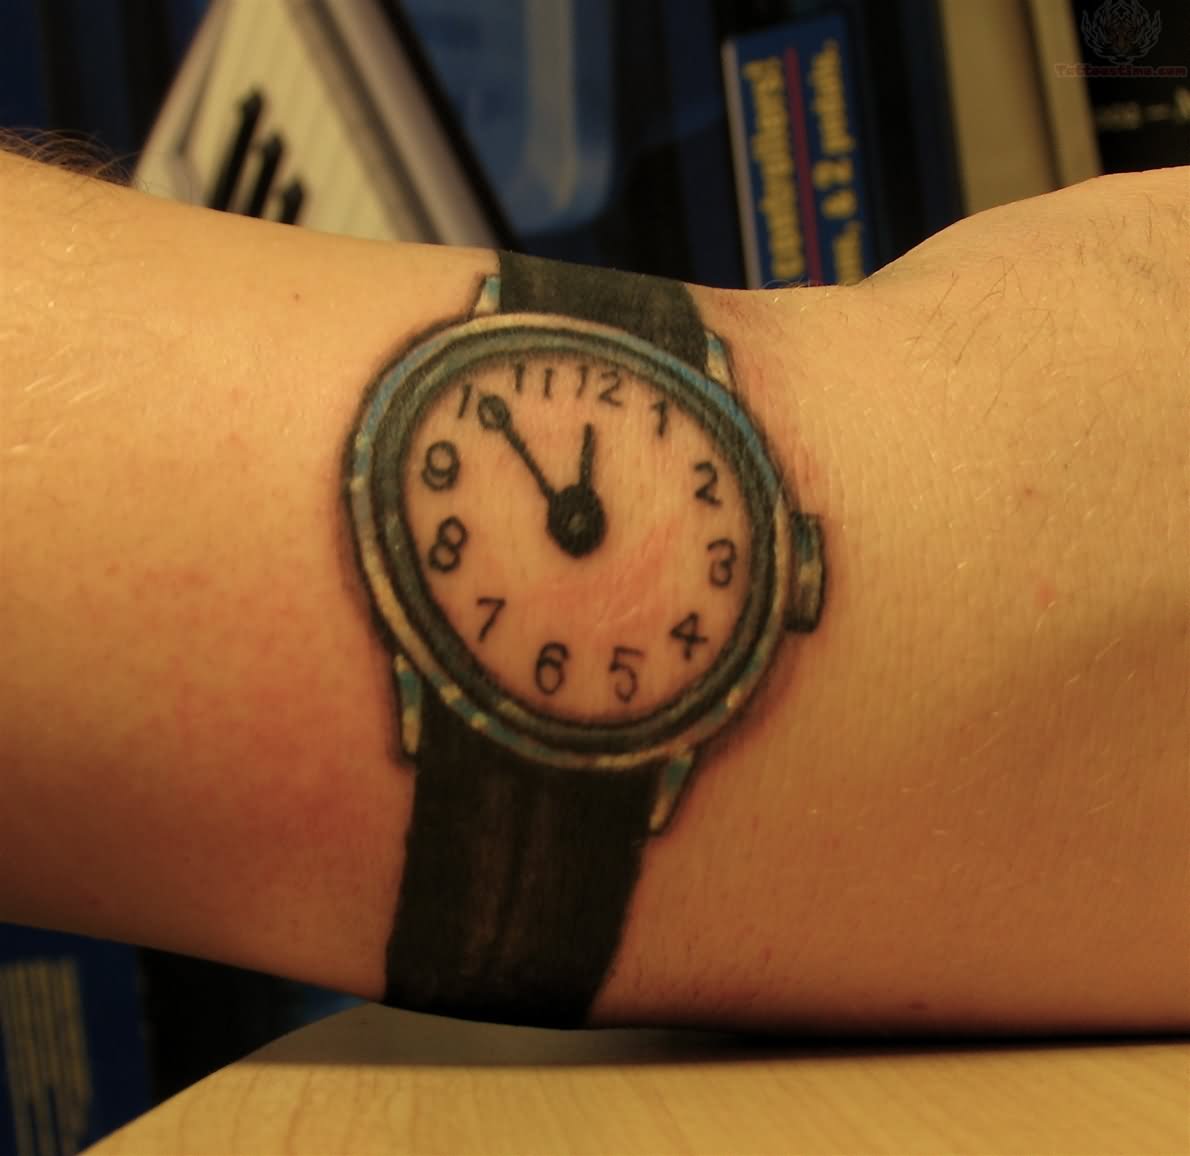 100+ Timeless Clock Tattoo Ideas (With Meanings) - Tattoo Stylist